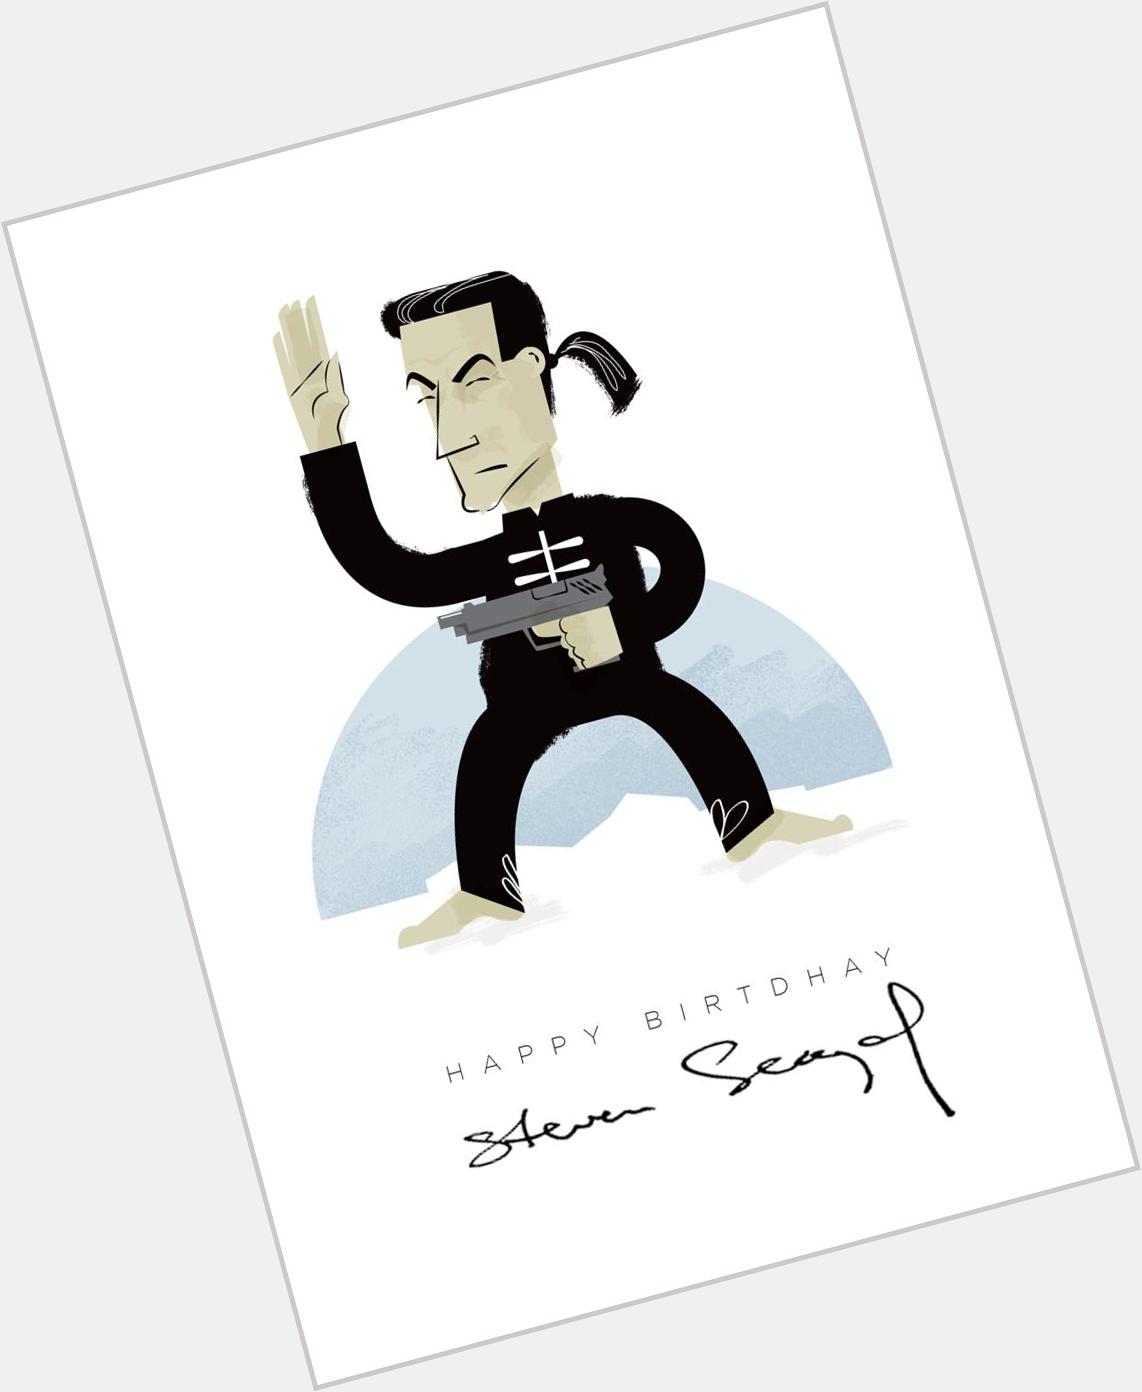 Happy 62nd birthday Steven Seagal - see more at  